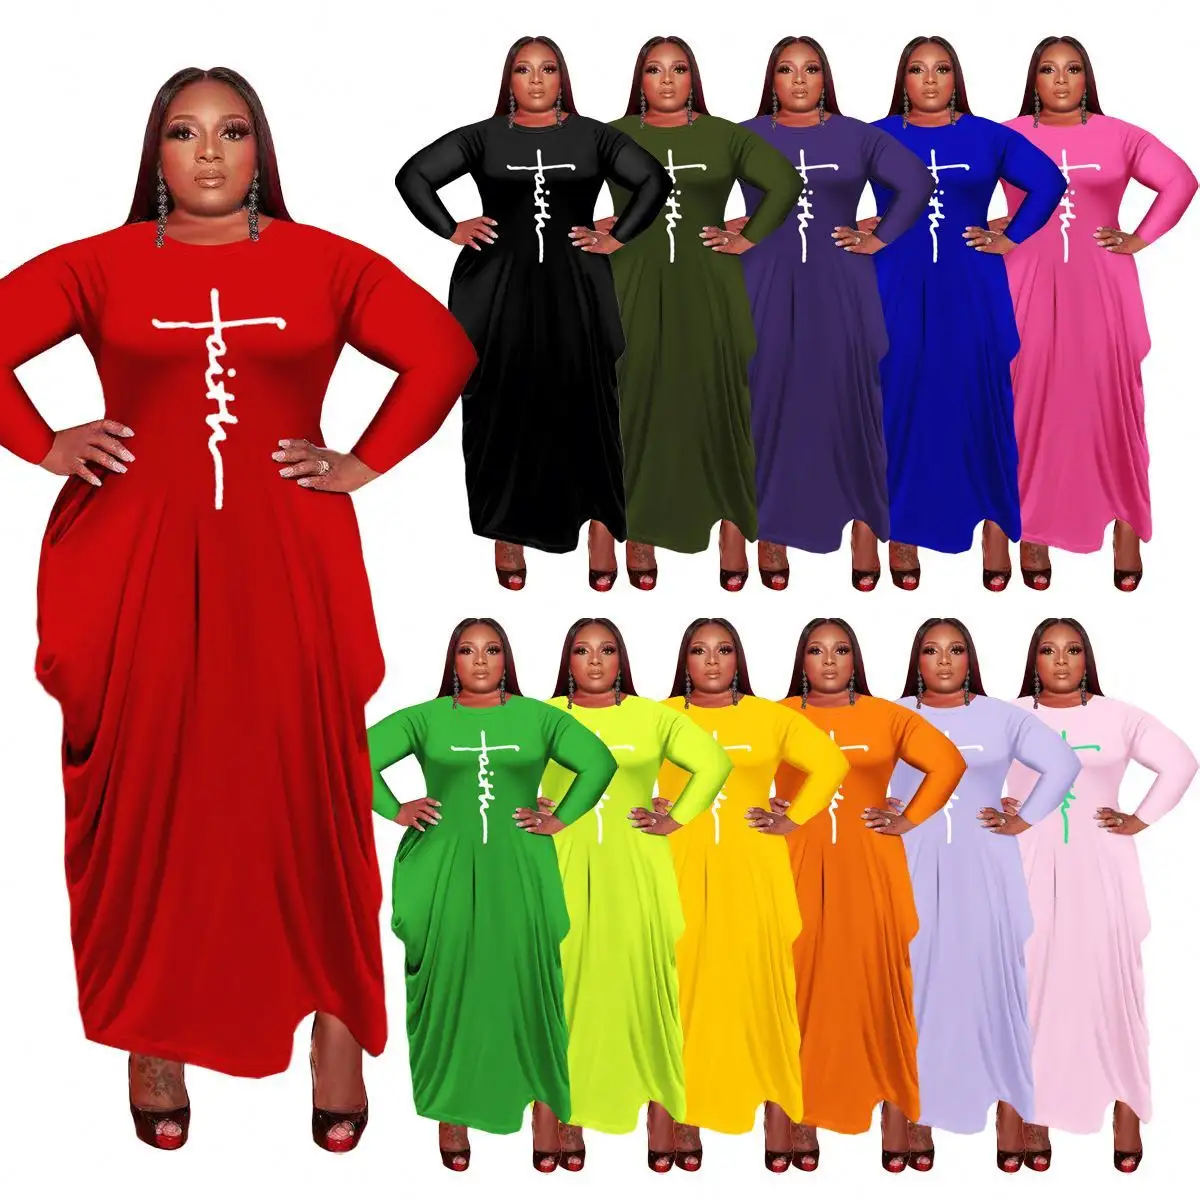 Summer 5XL Women's sexy clothing Faith Oversize Causal Loose Party long sleeve plus size women maxi Dresses